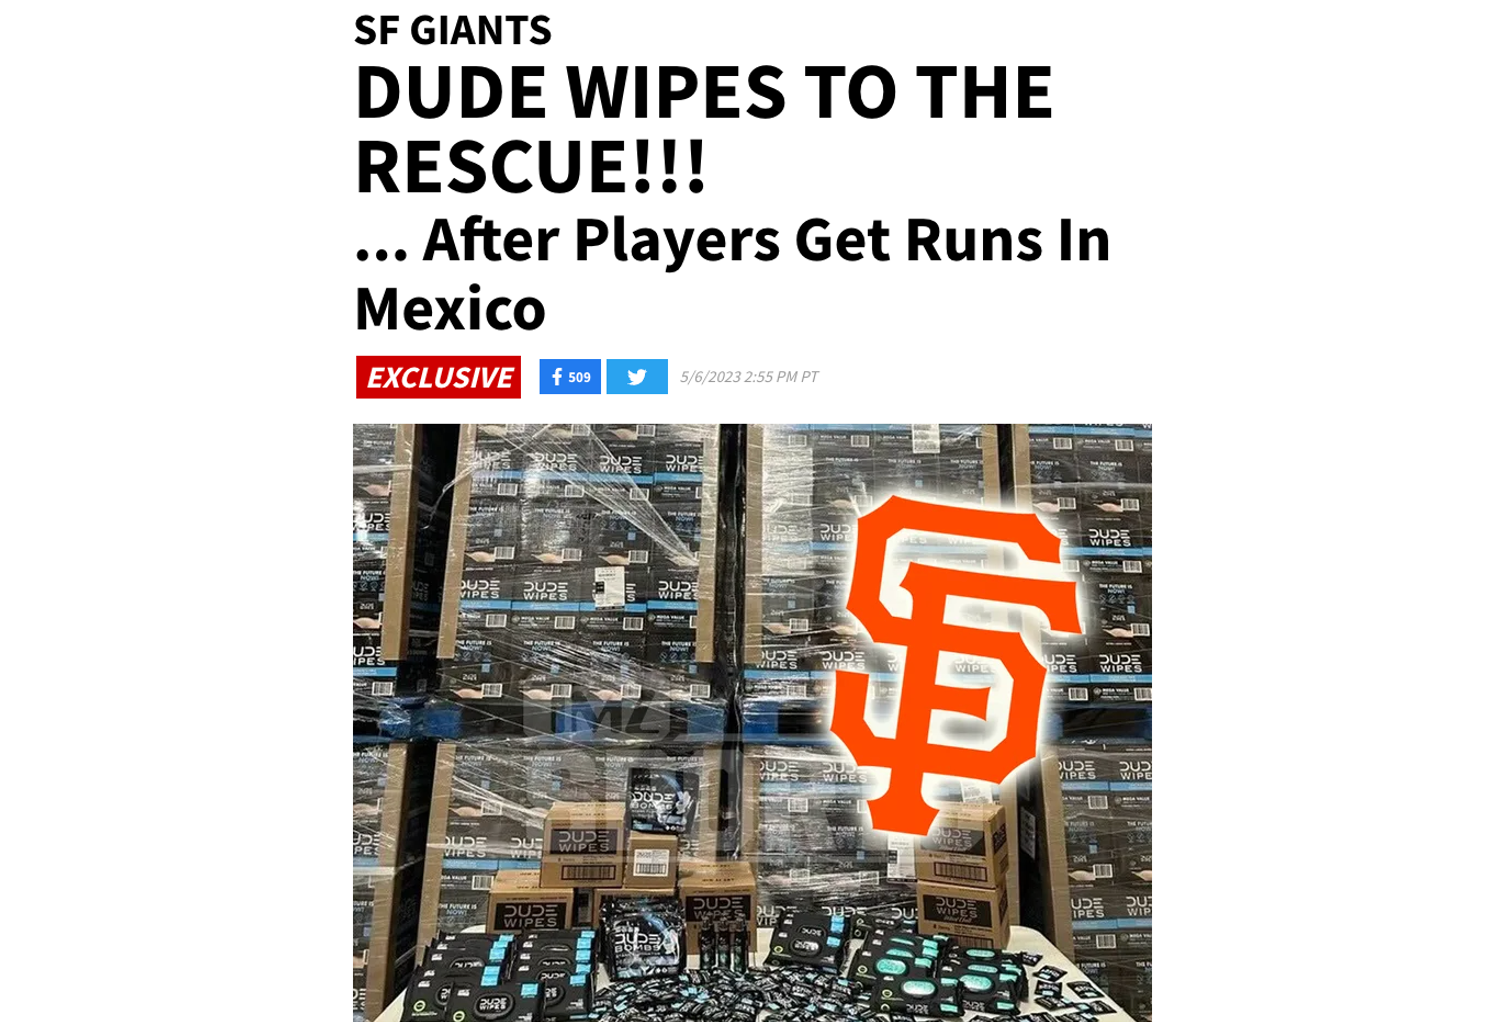 SF Giants Score a Season’s Worth of DUDE Wipes After Messy Mexico Series